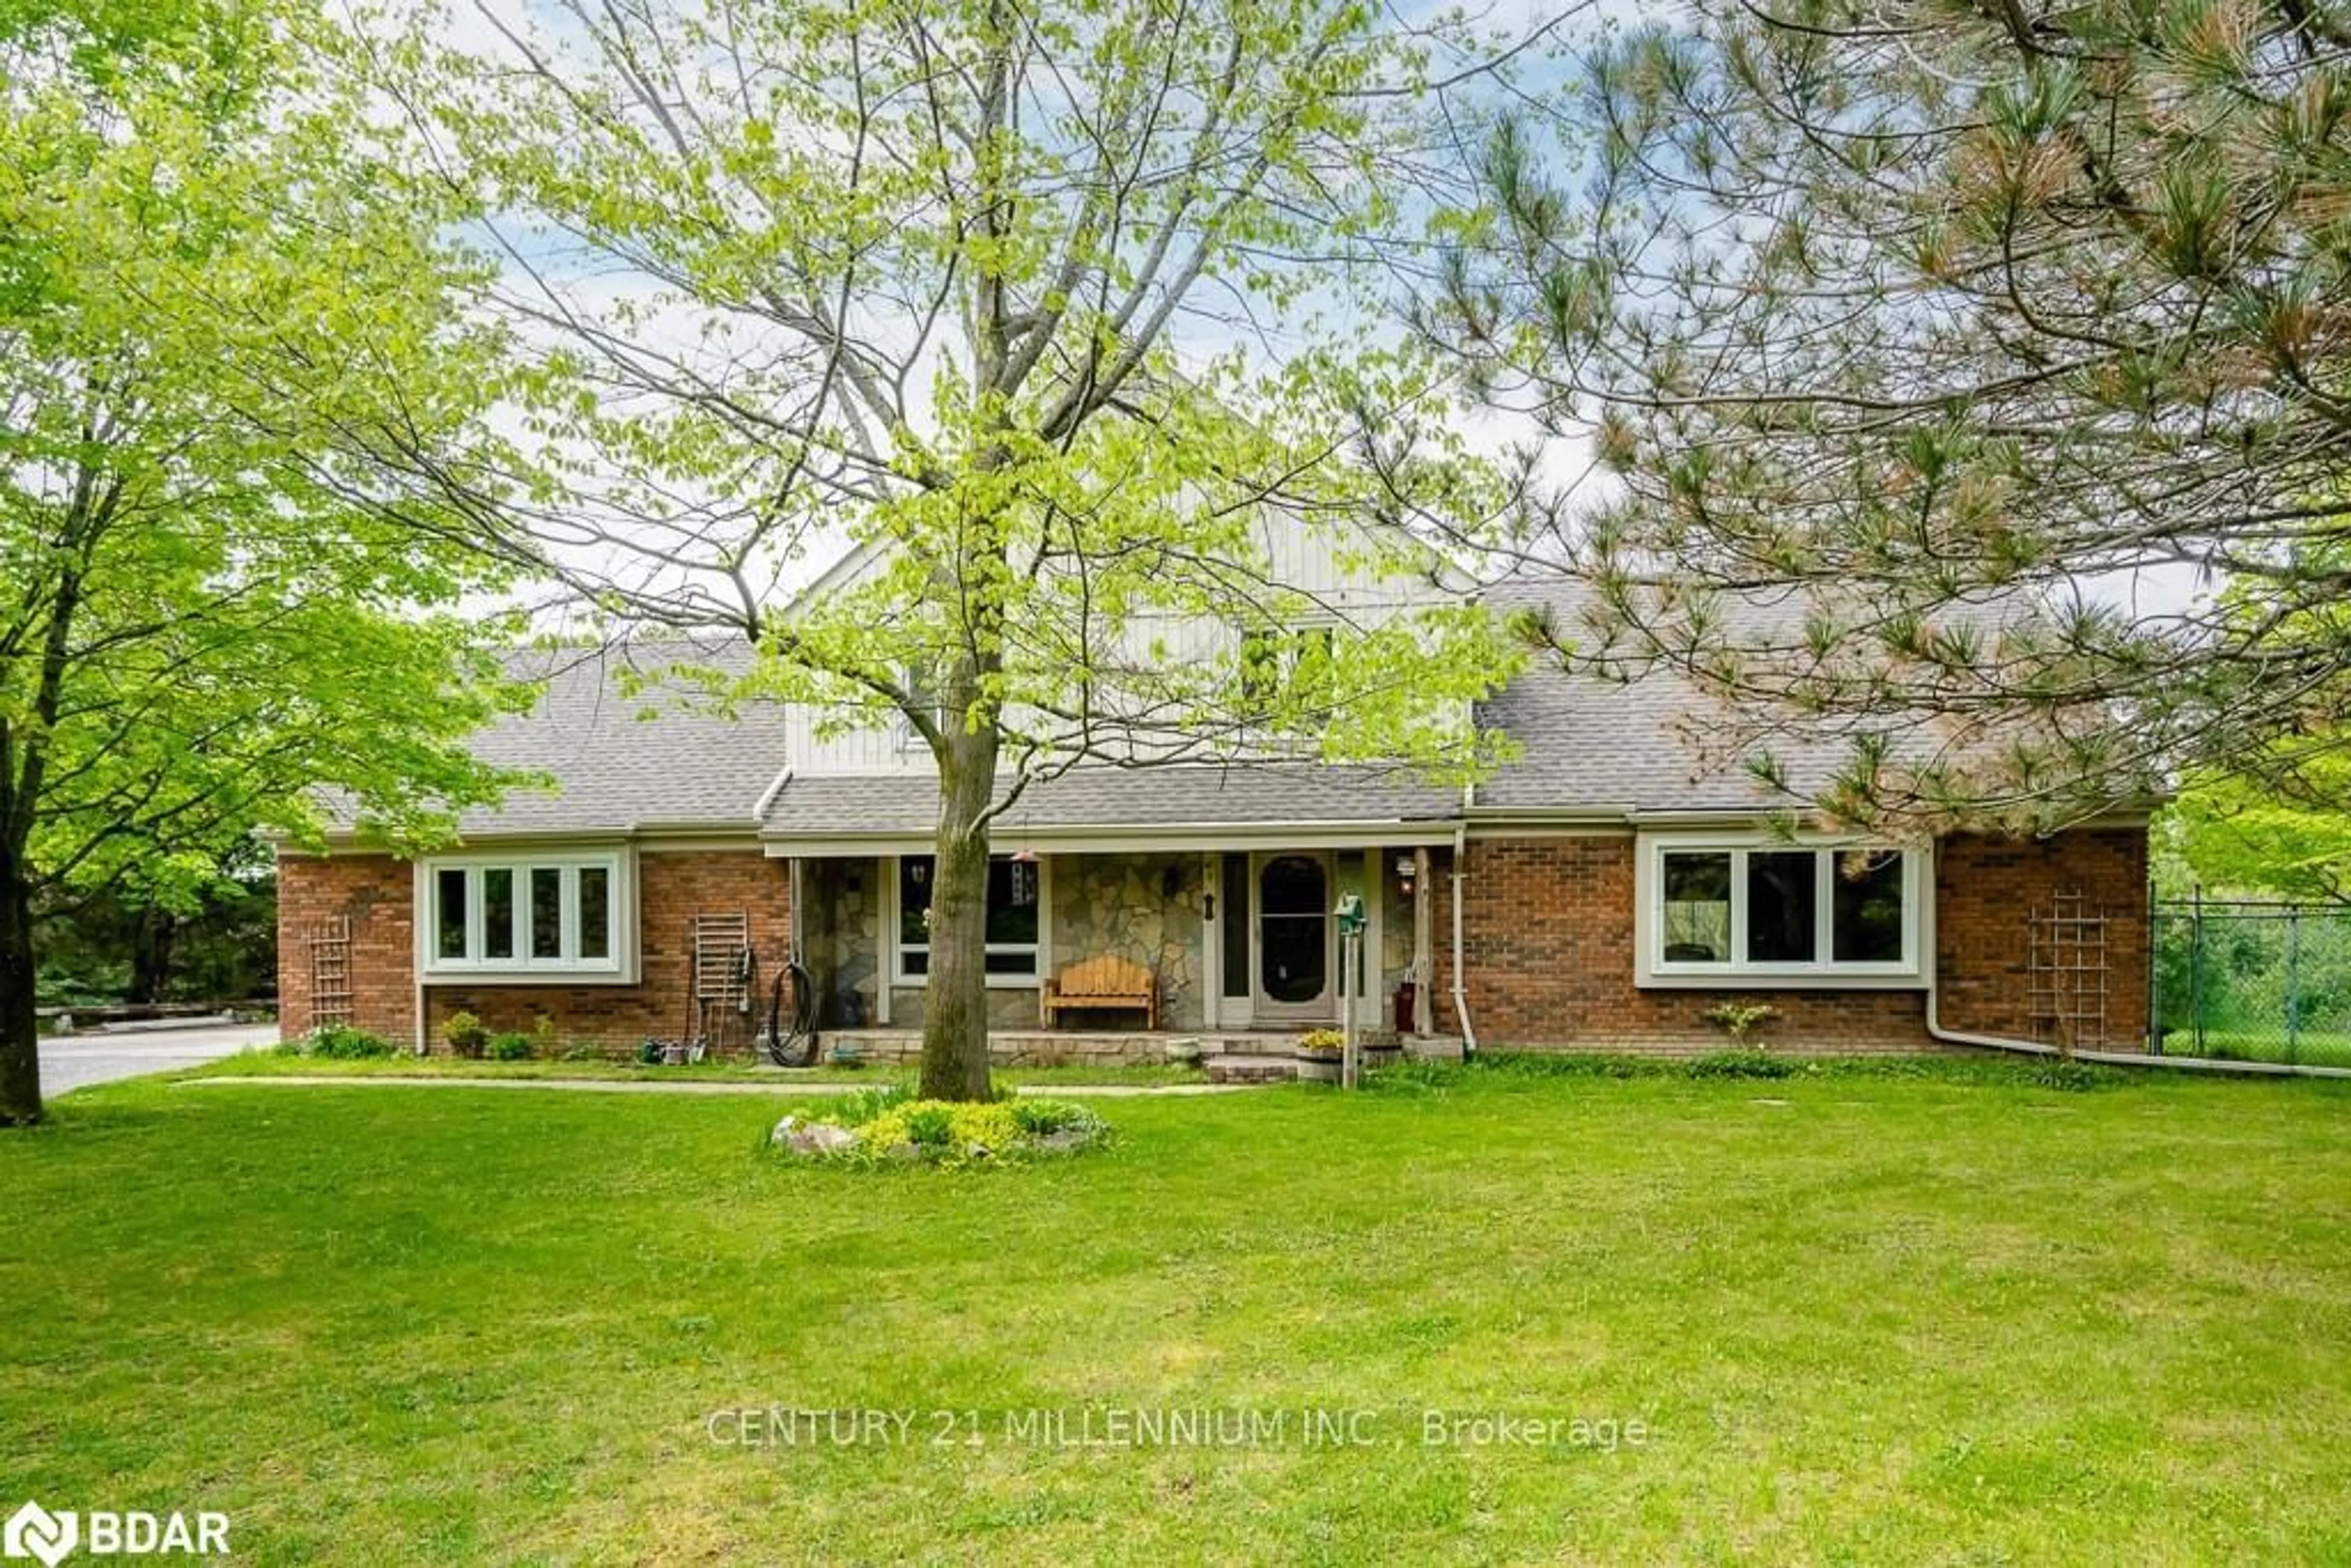 Home with brick exterior material for 3628 12 Line, Bradford West Gwillimbury Ontario L0L 1L0